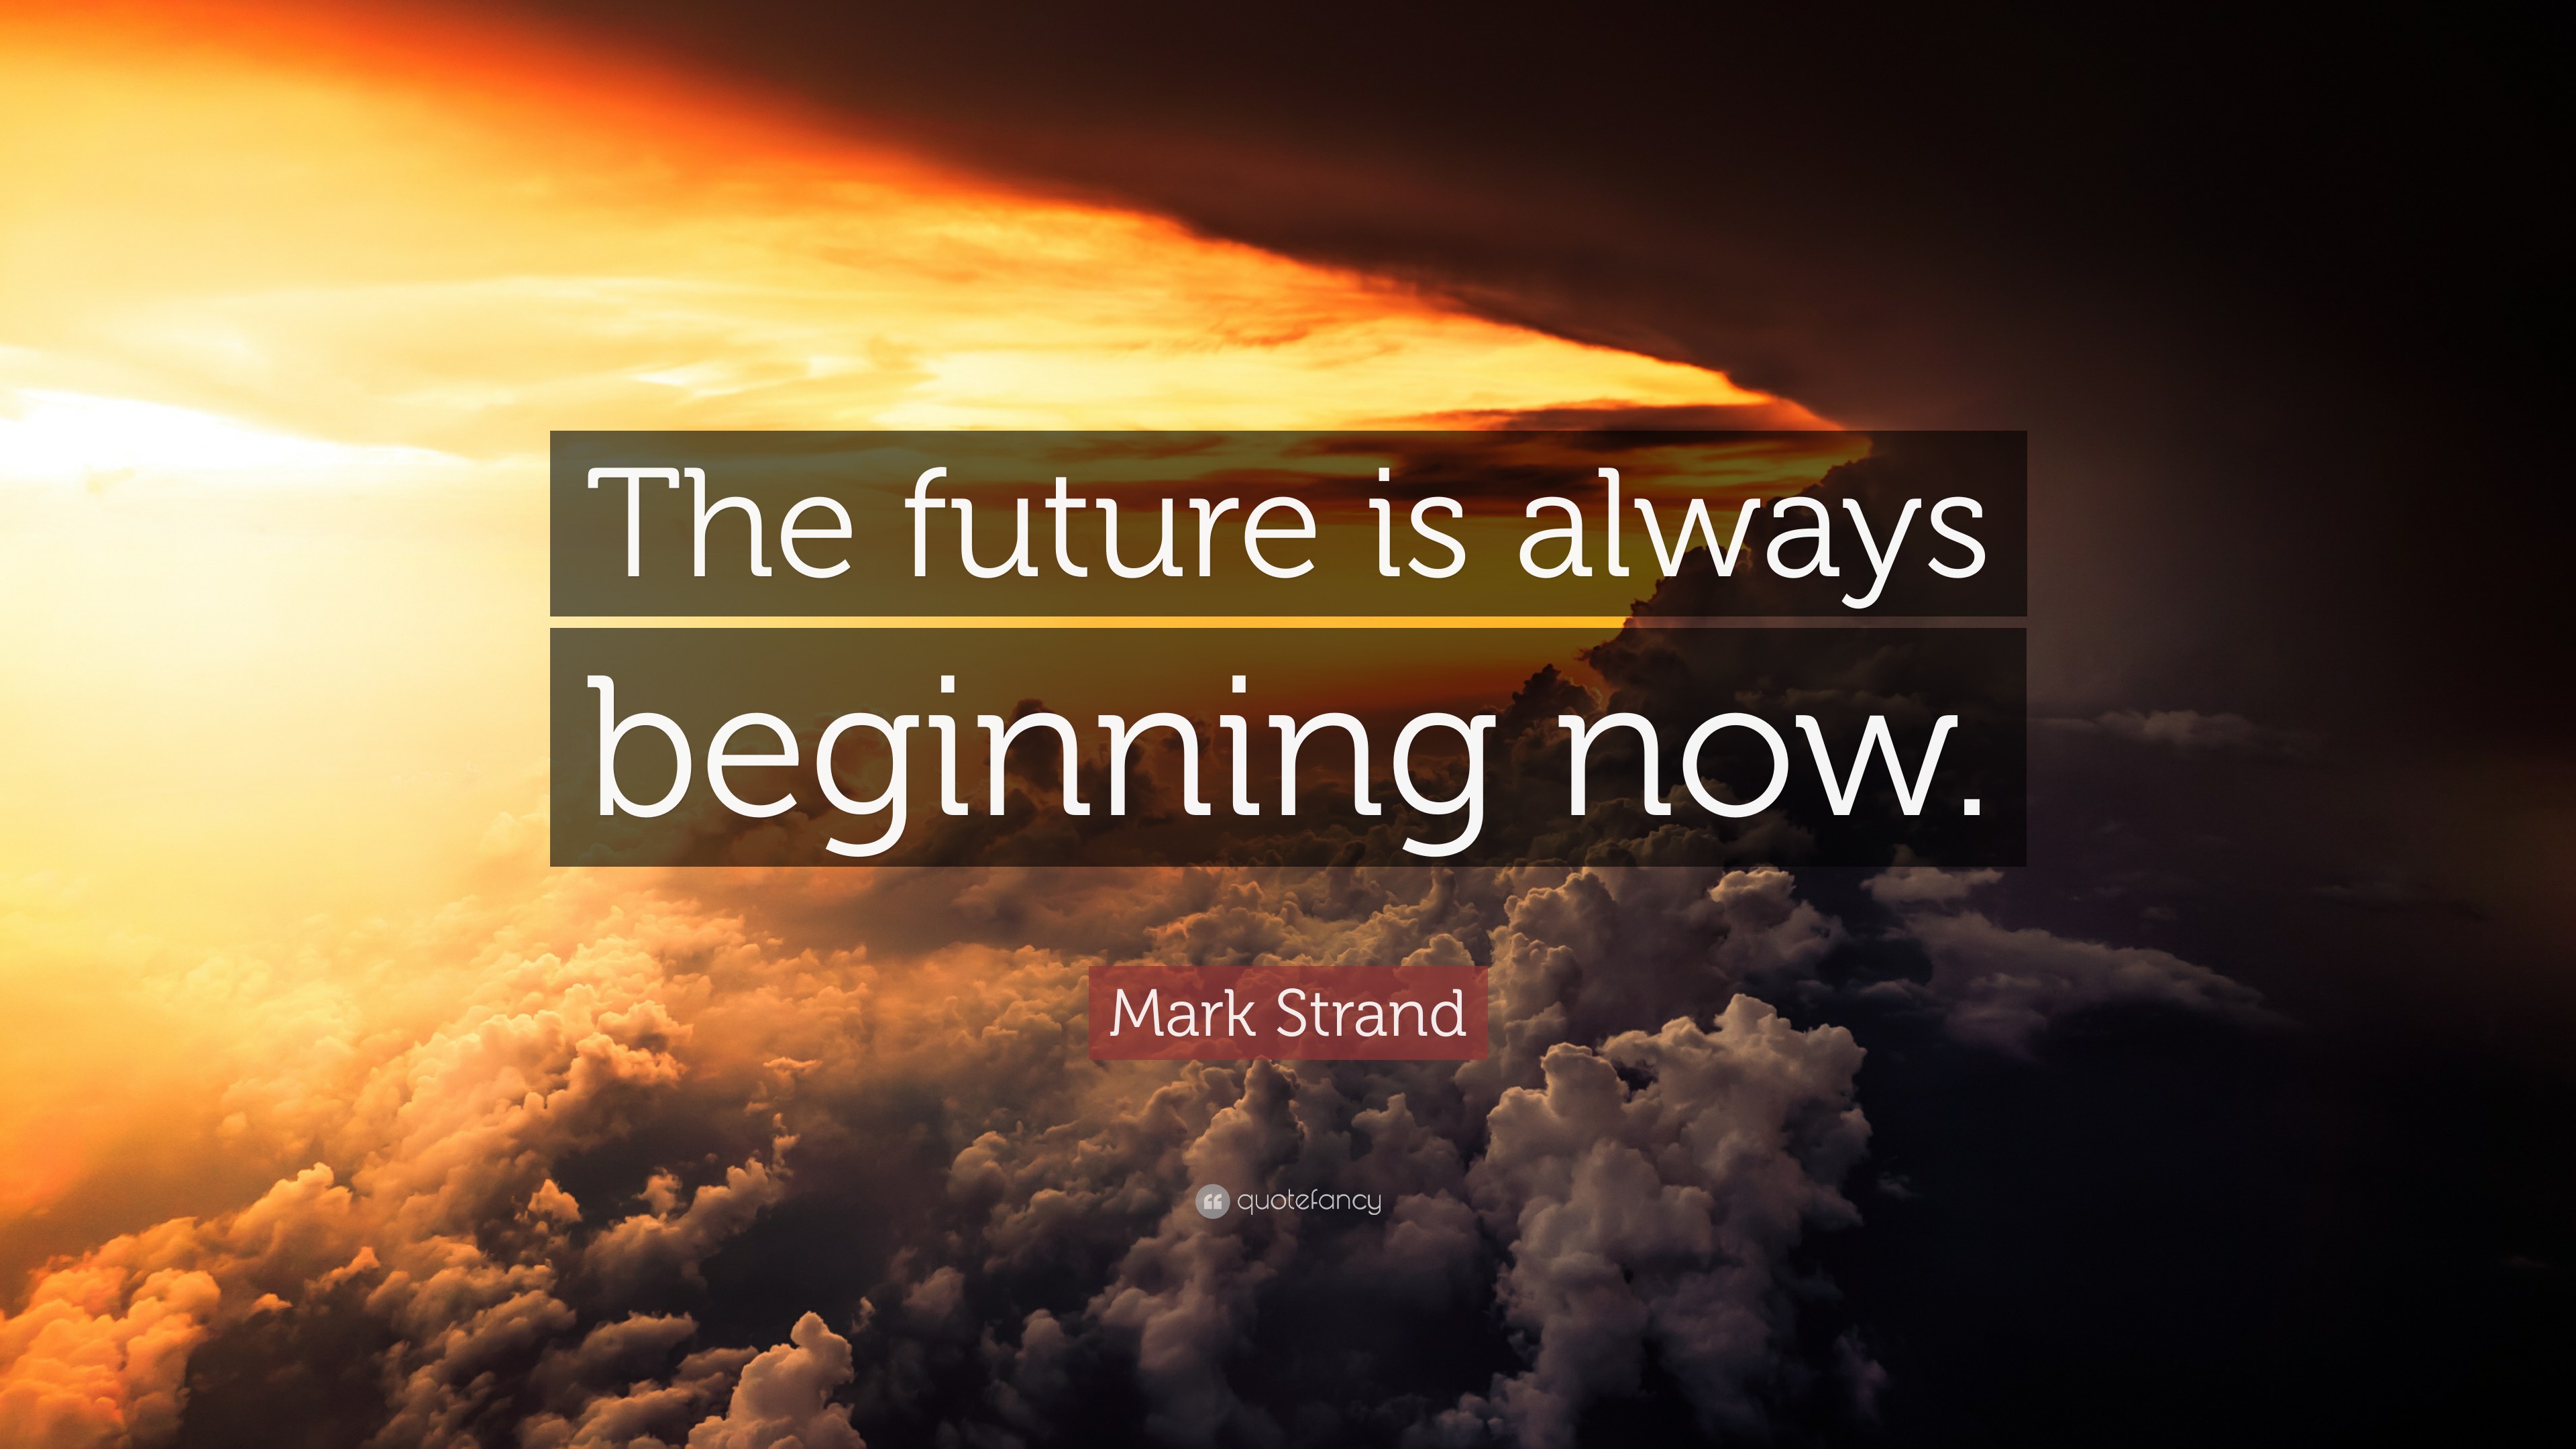 Mark Strand Quote: “The future is always beginning now.”